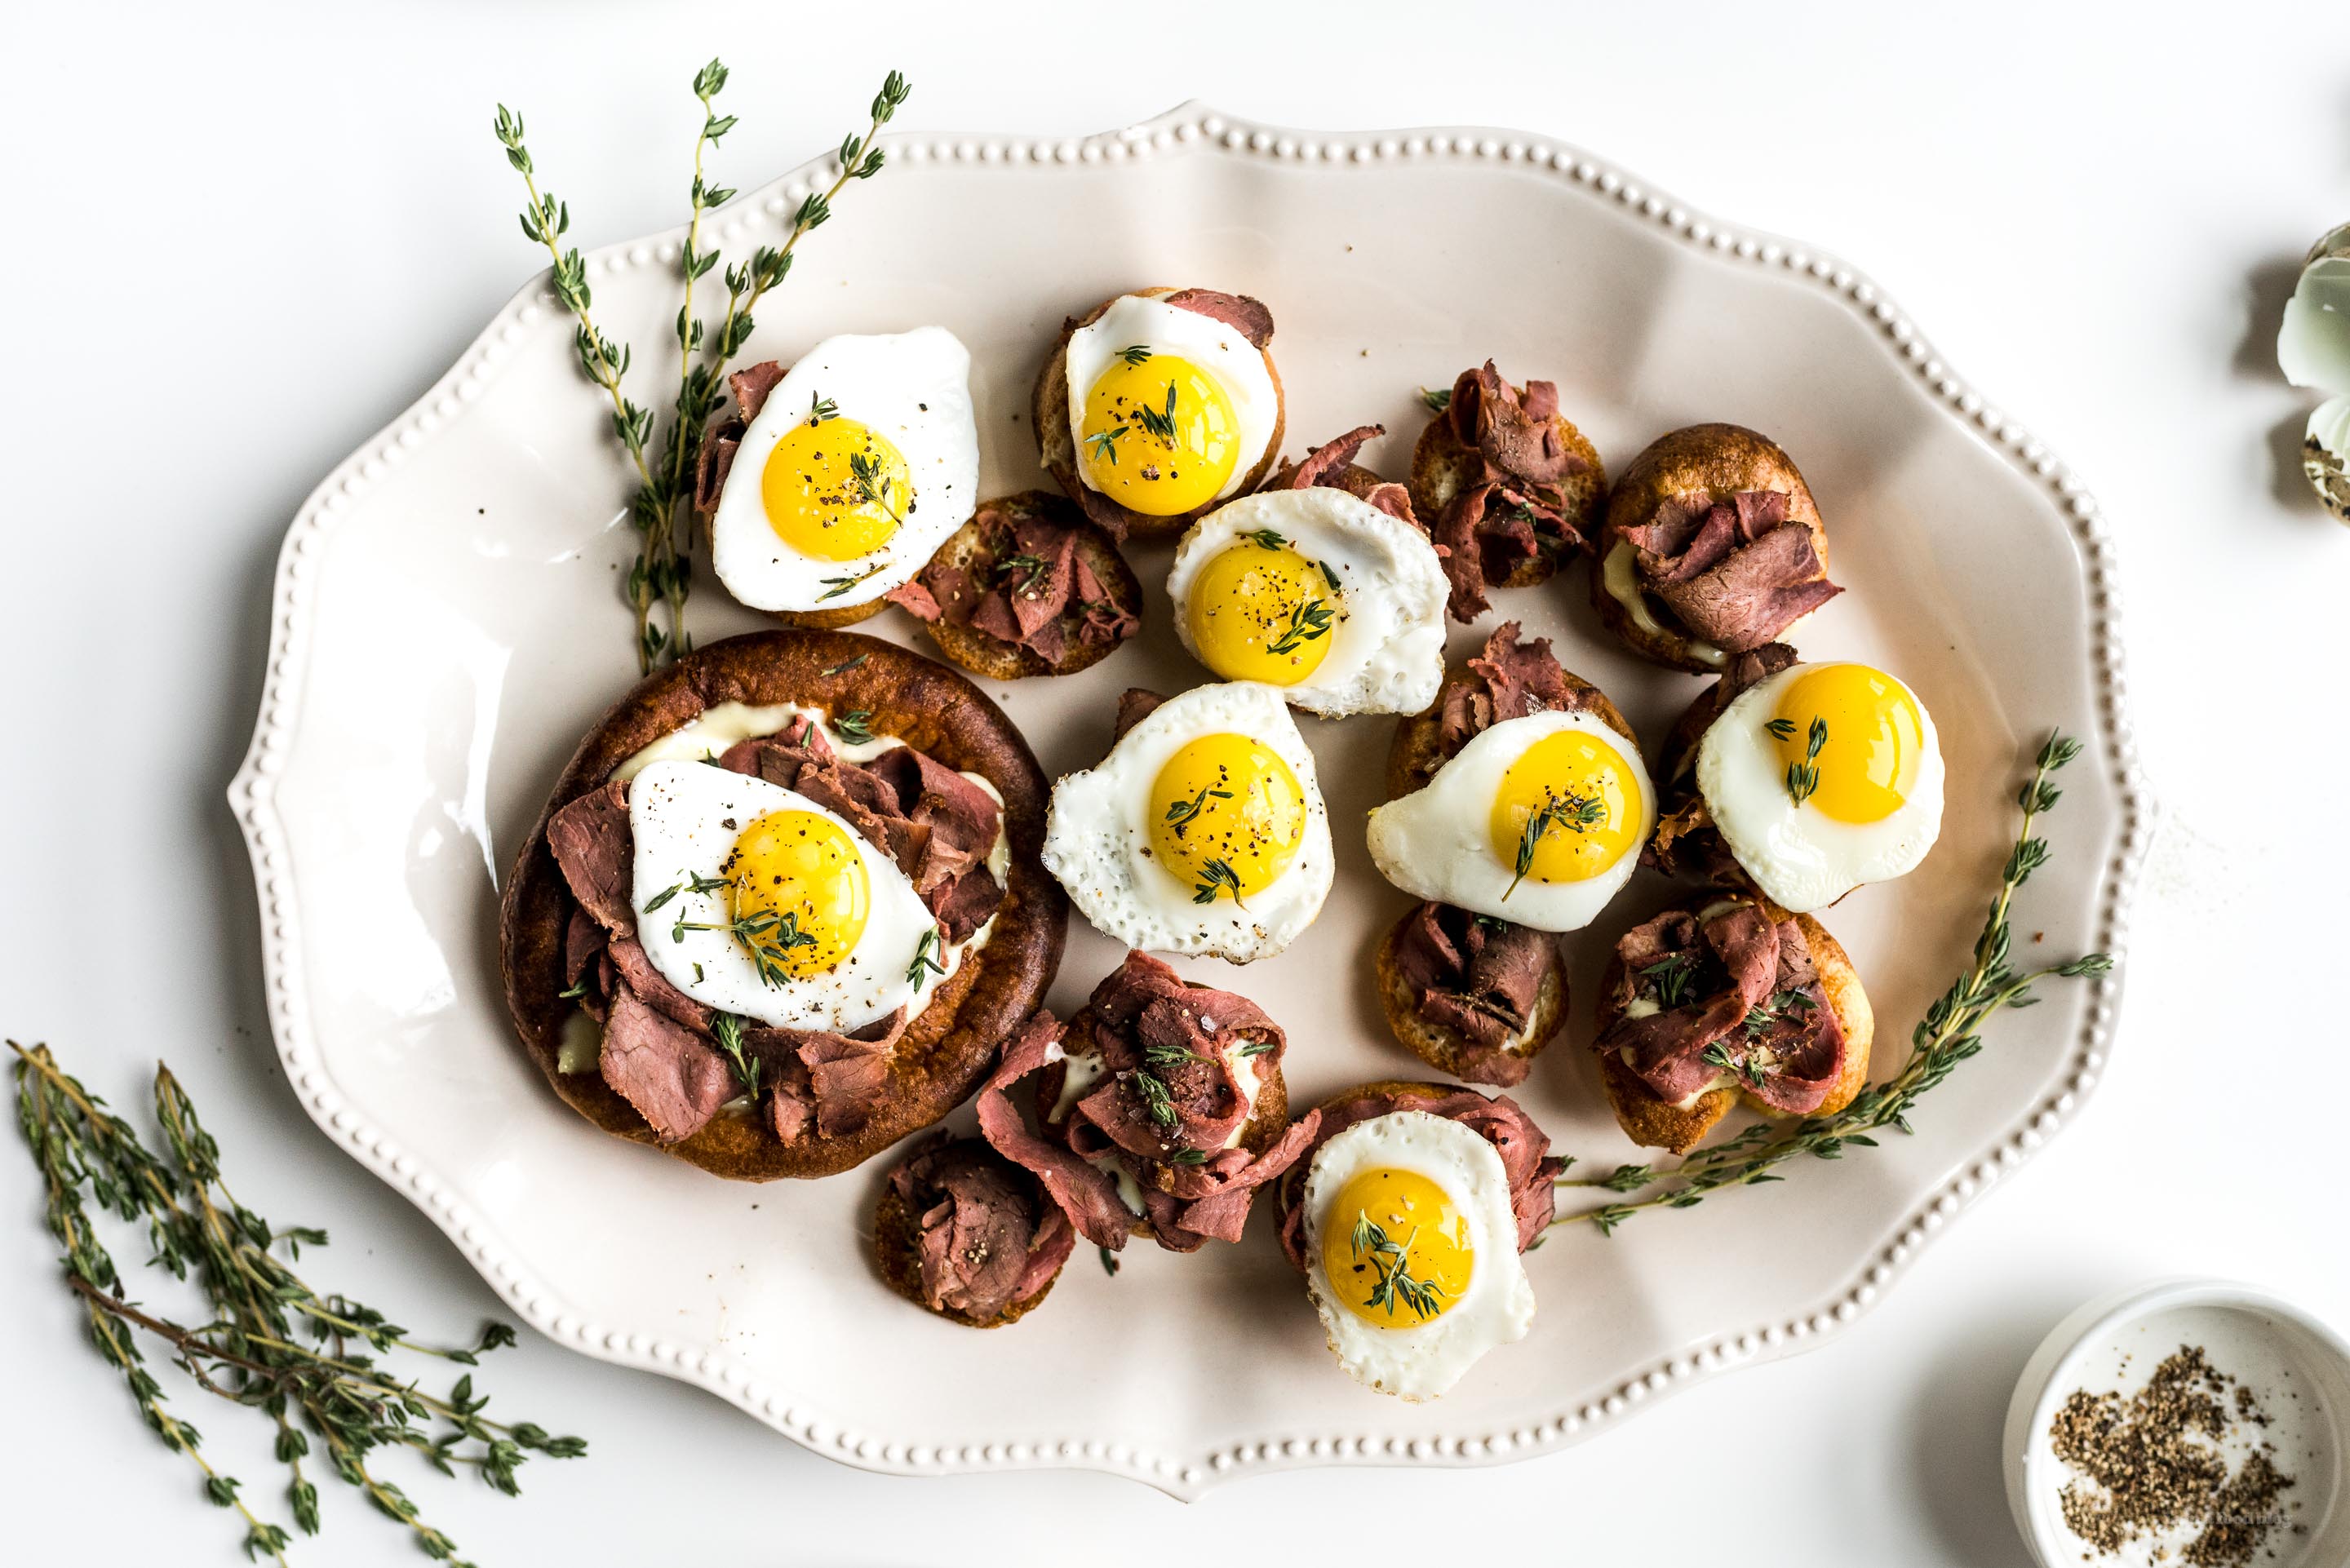 Sunday Brunch: Breakfast Yorkshire Puddings with Roast Beef and Eggs